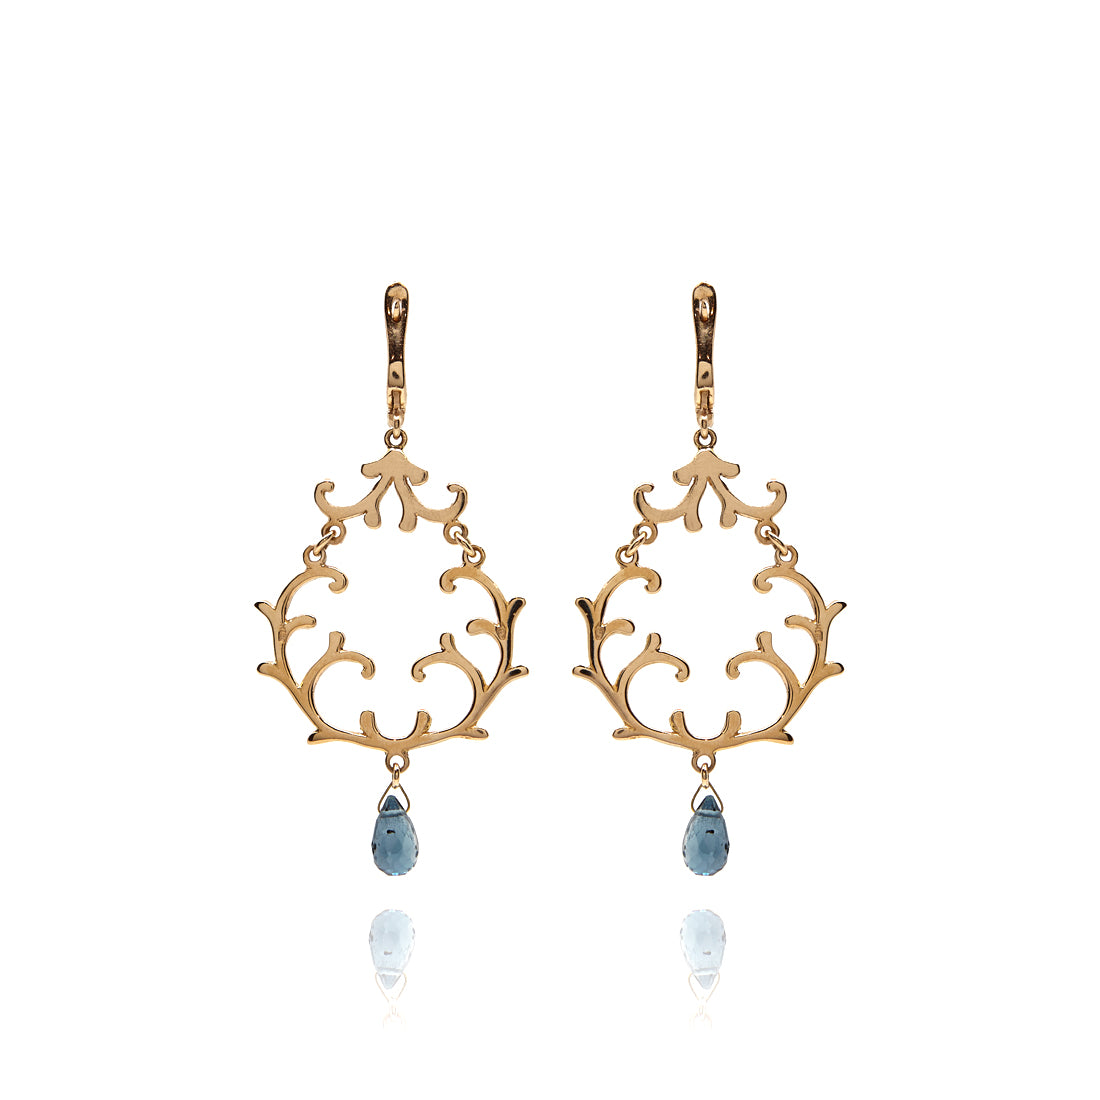 Rose gold earrings with London blue topaz